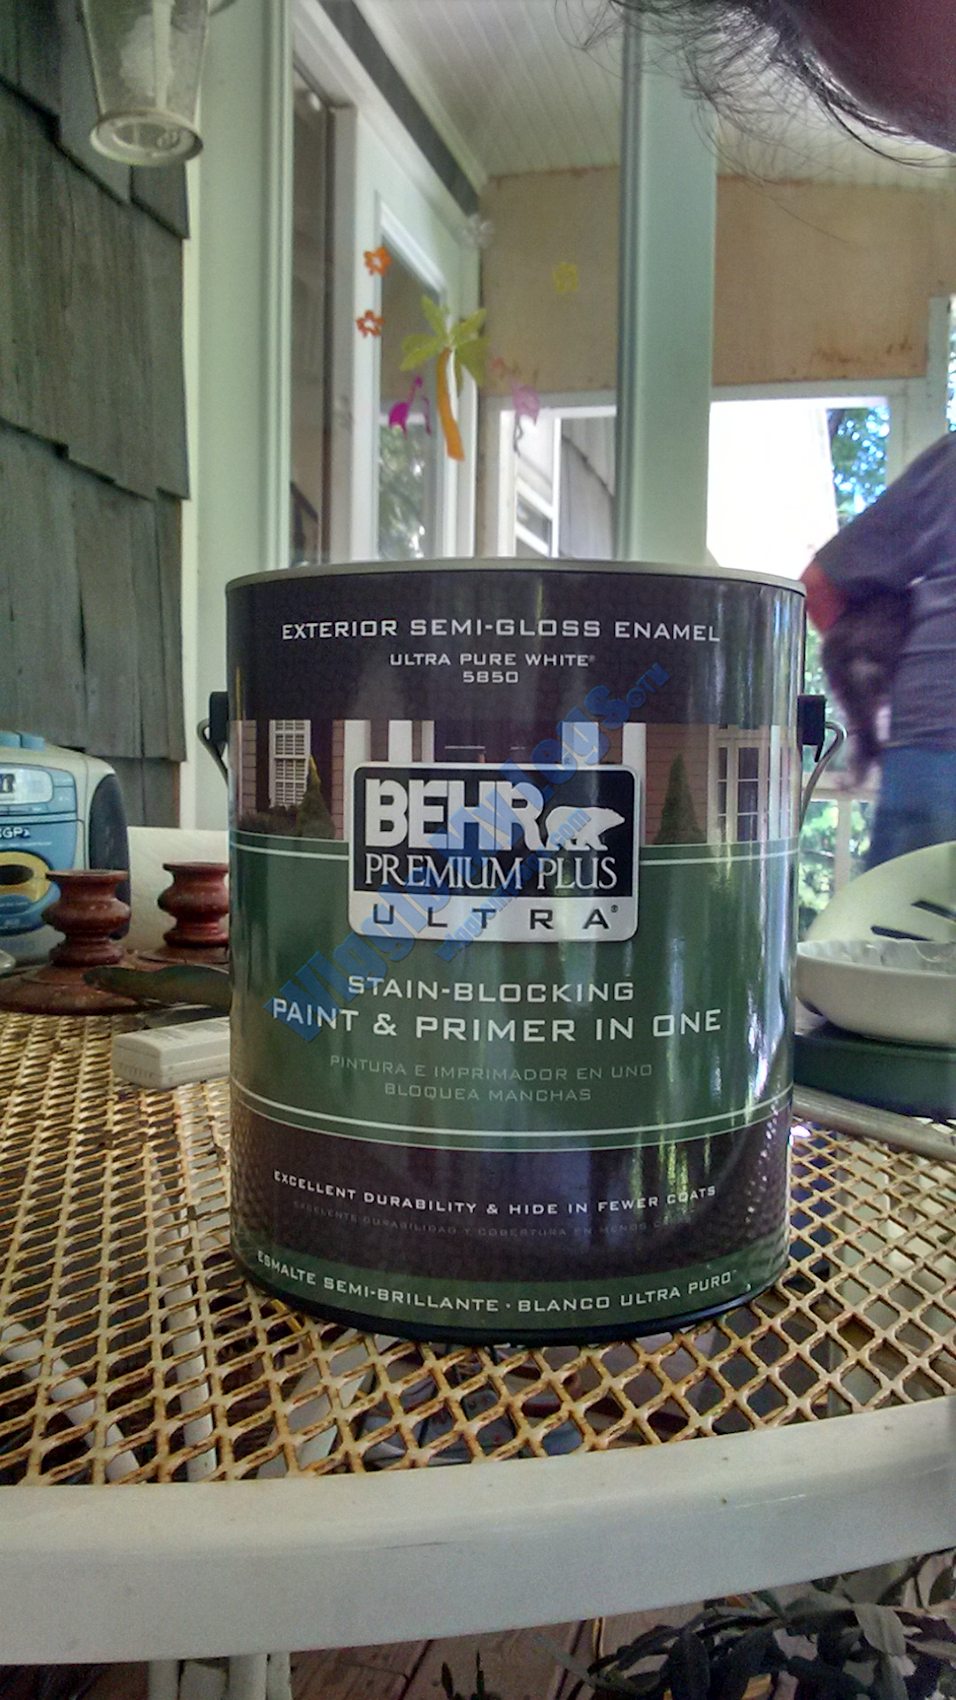 The chosen paint was this Behr Premium Plus Ultra, Stain-blocking Paint and Primer in One.